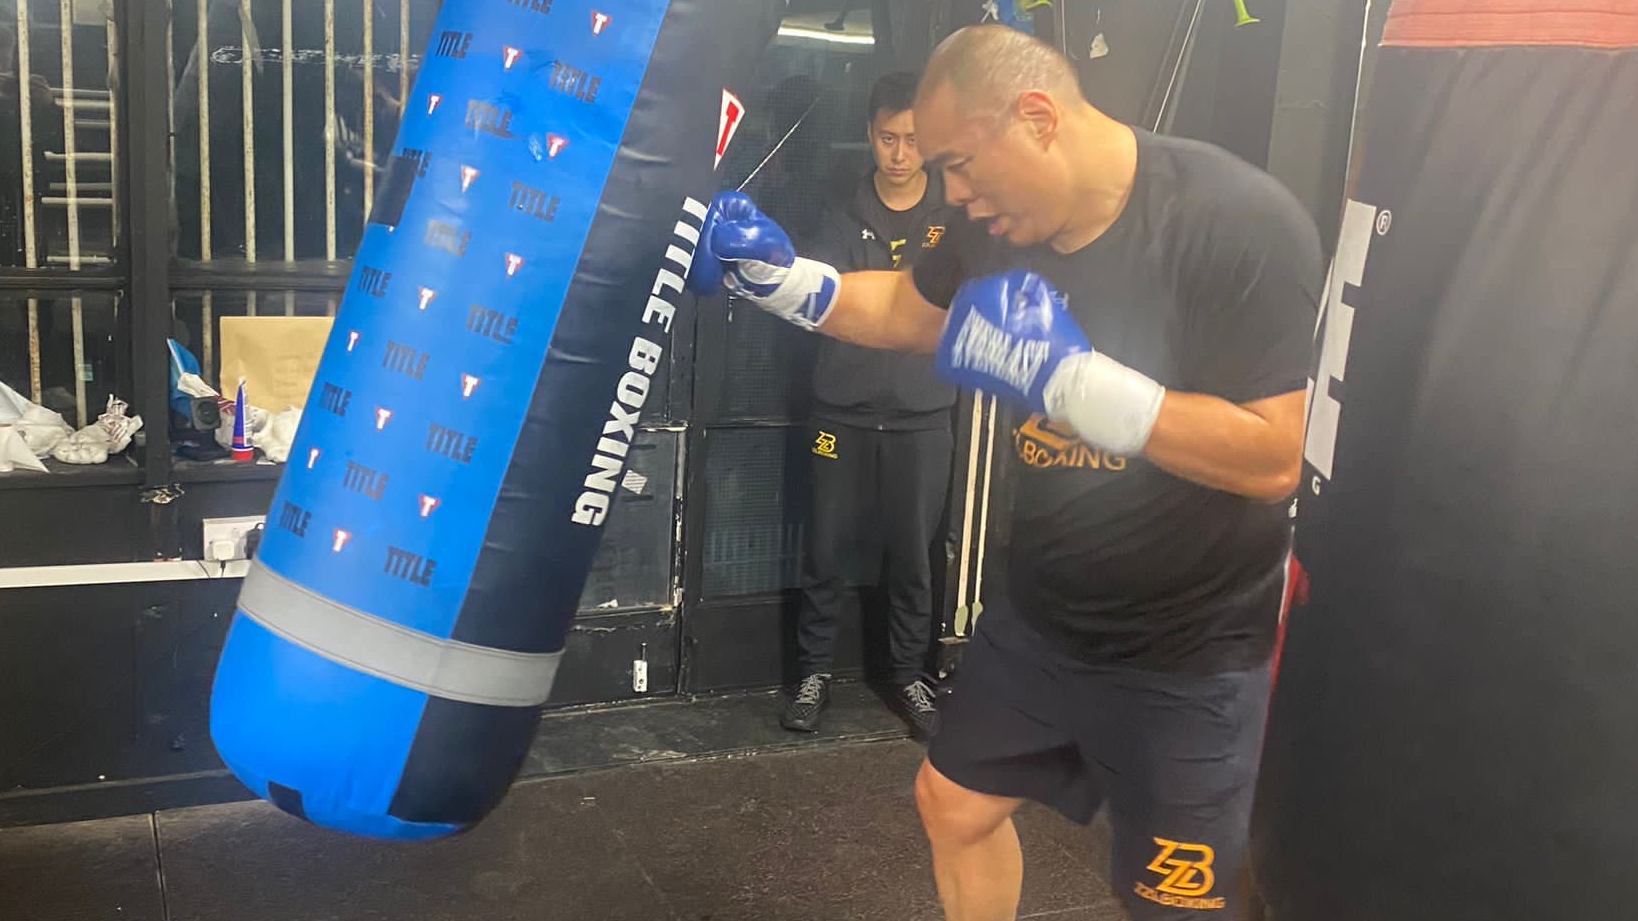 Zhang Zhilei turned 40 in May but a strict diet and training regime are helping him to remain at the peak of his powers ahead of his rematch with Joe Joyce on Saturday night./CGTN Europe.